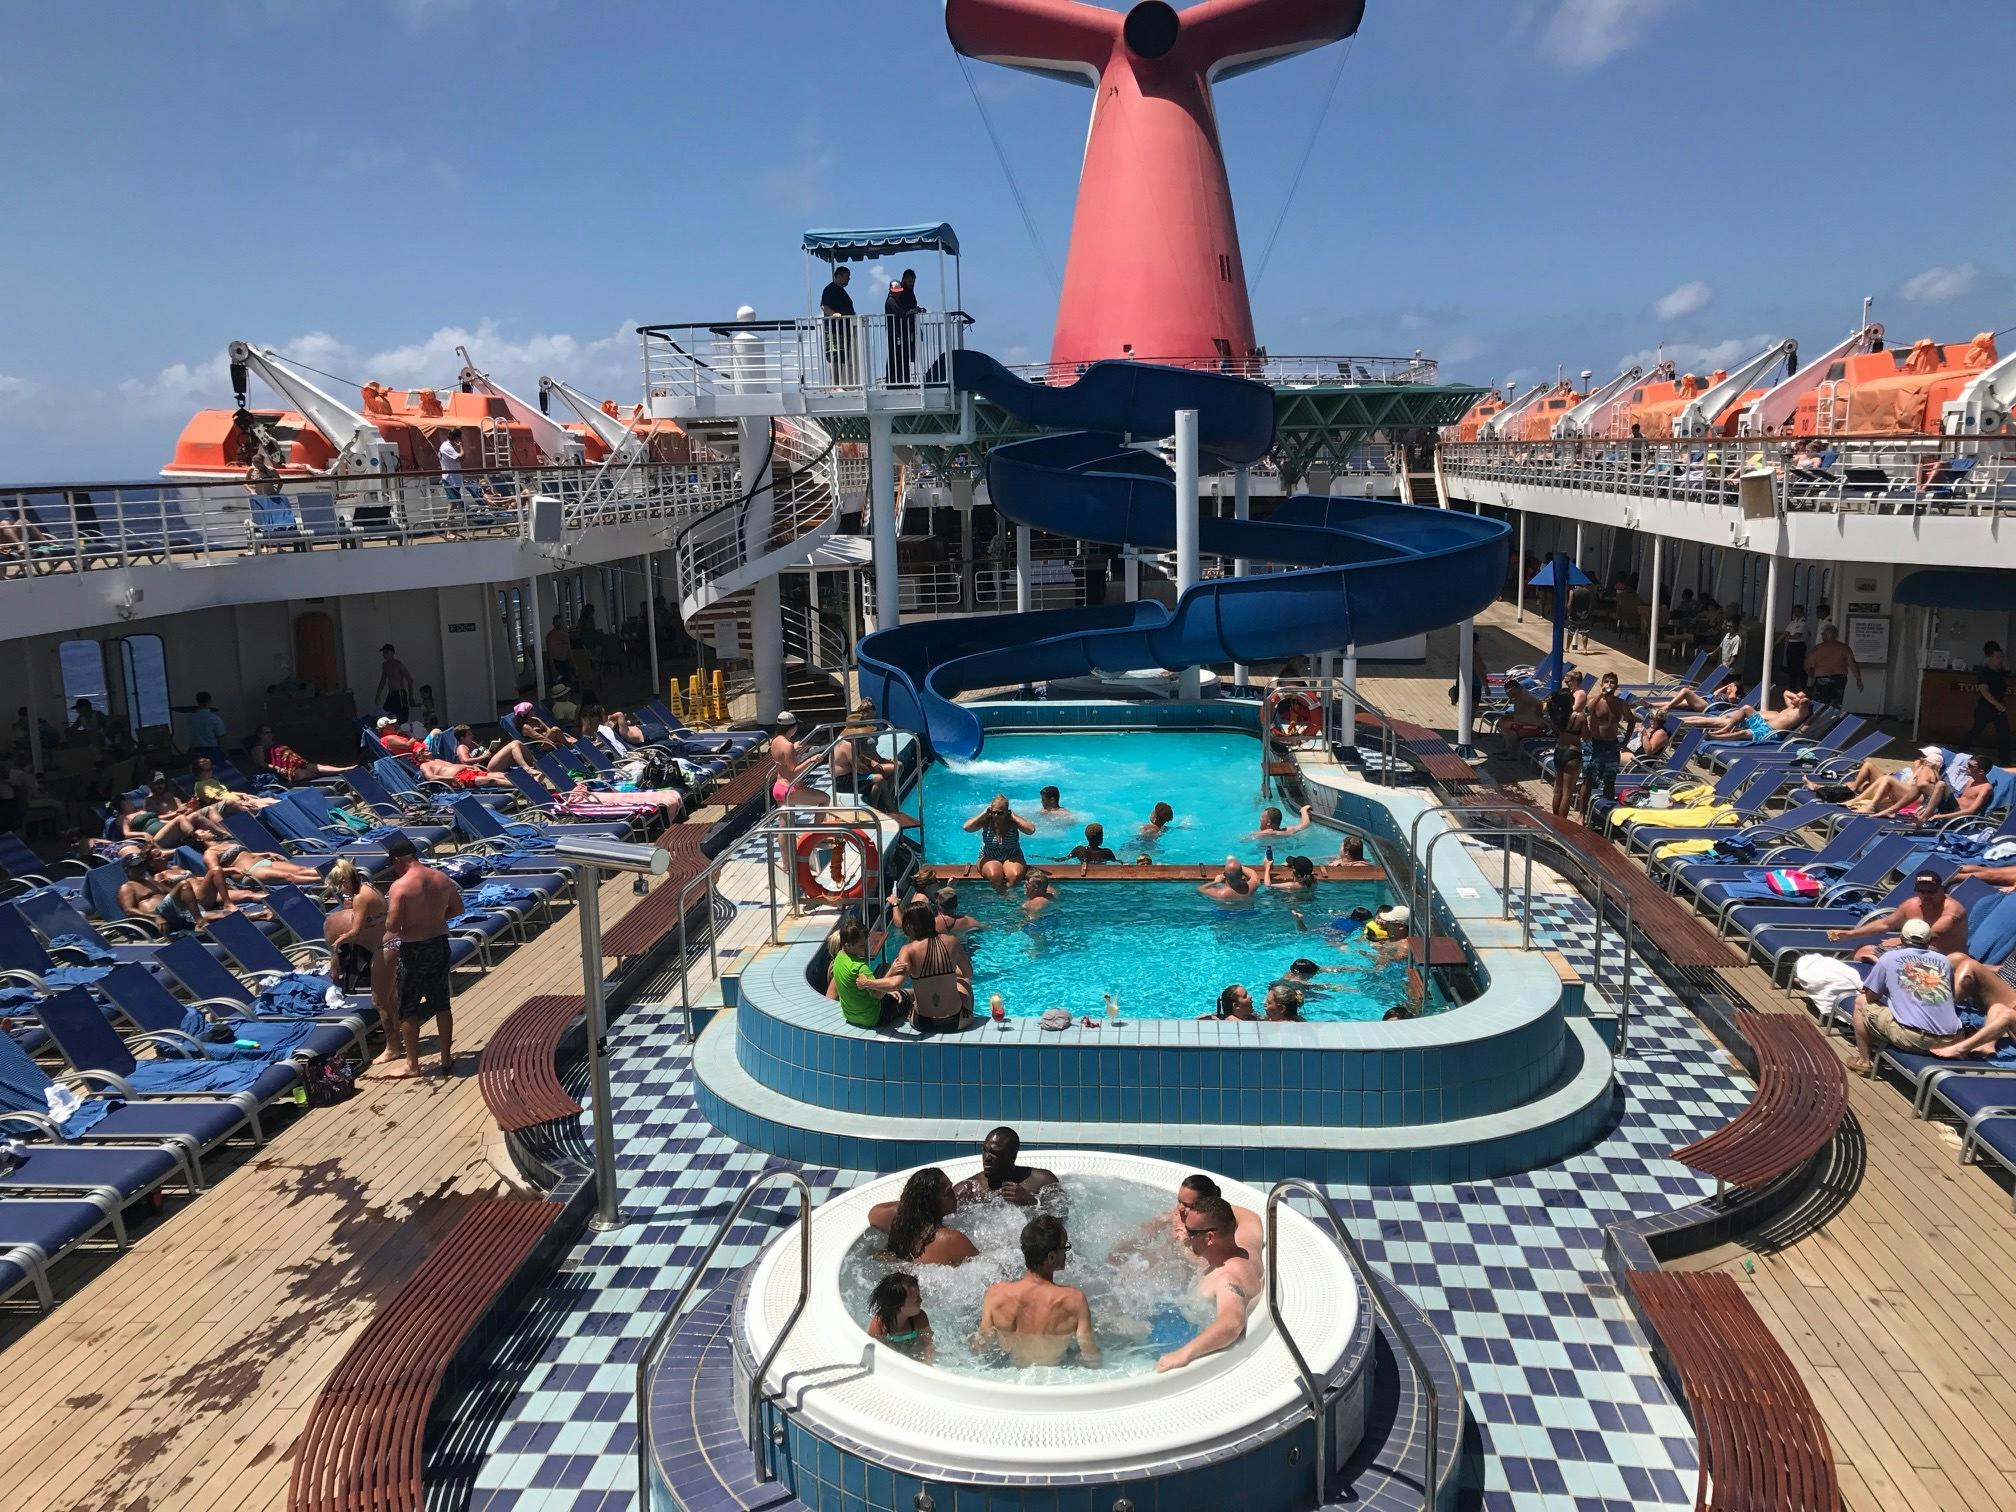 Carnival Paradise Cruise Review by KM17 May 13, 2017